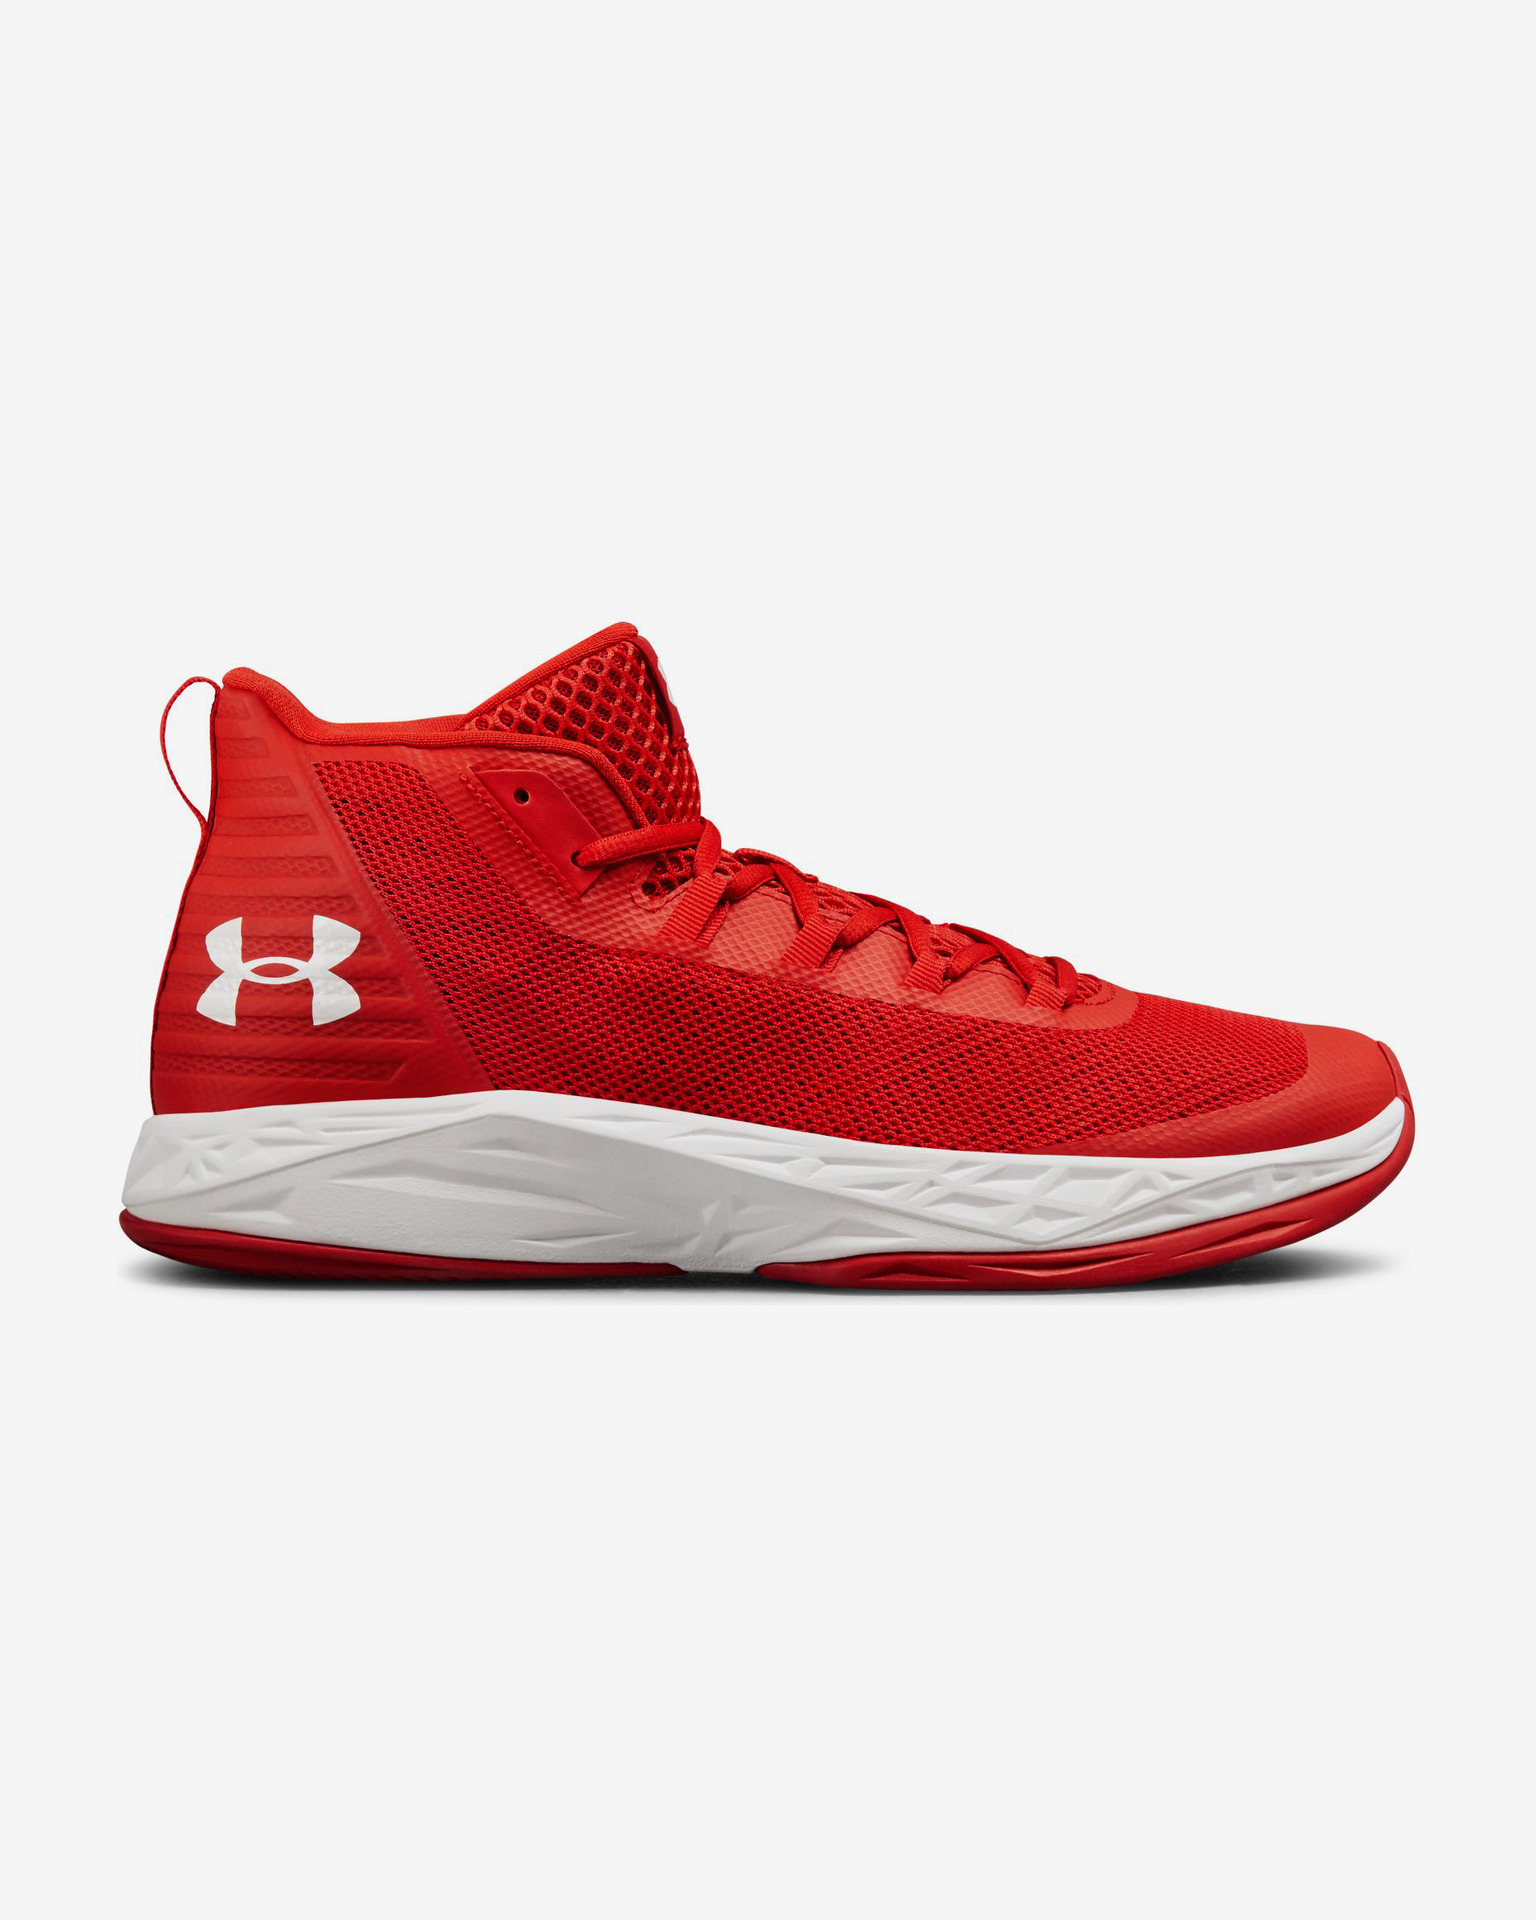 Under Armour - Jet Mid Basketball Sneakers